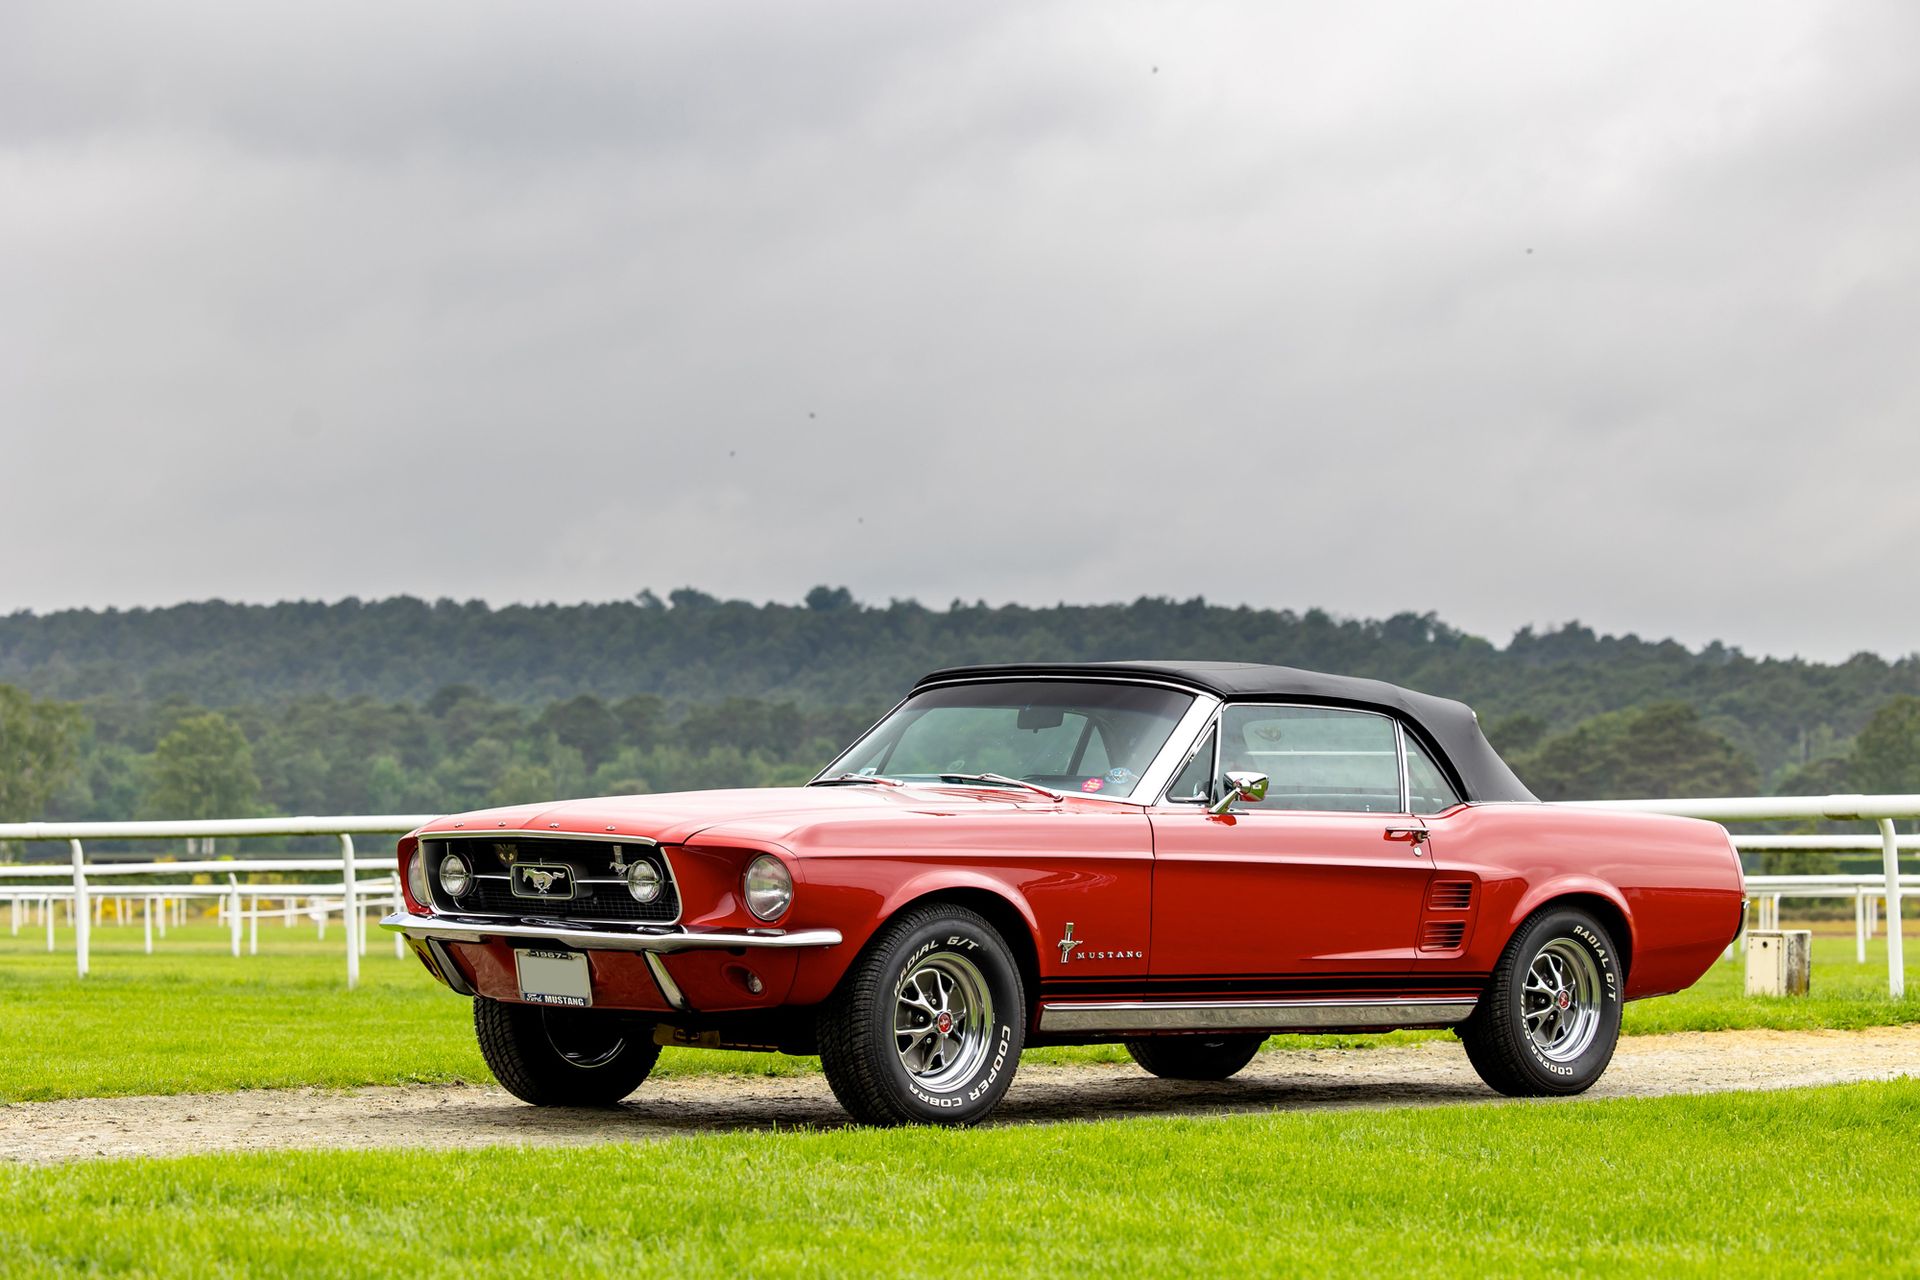 1967 FORD MUSTANG 289 CABRIOLET 1967 FORD MUSTANG 289 CONVERTIBLE

Número de ser&hellip;